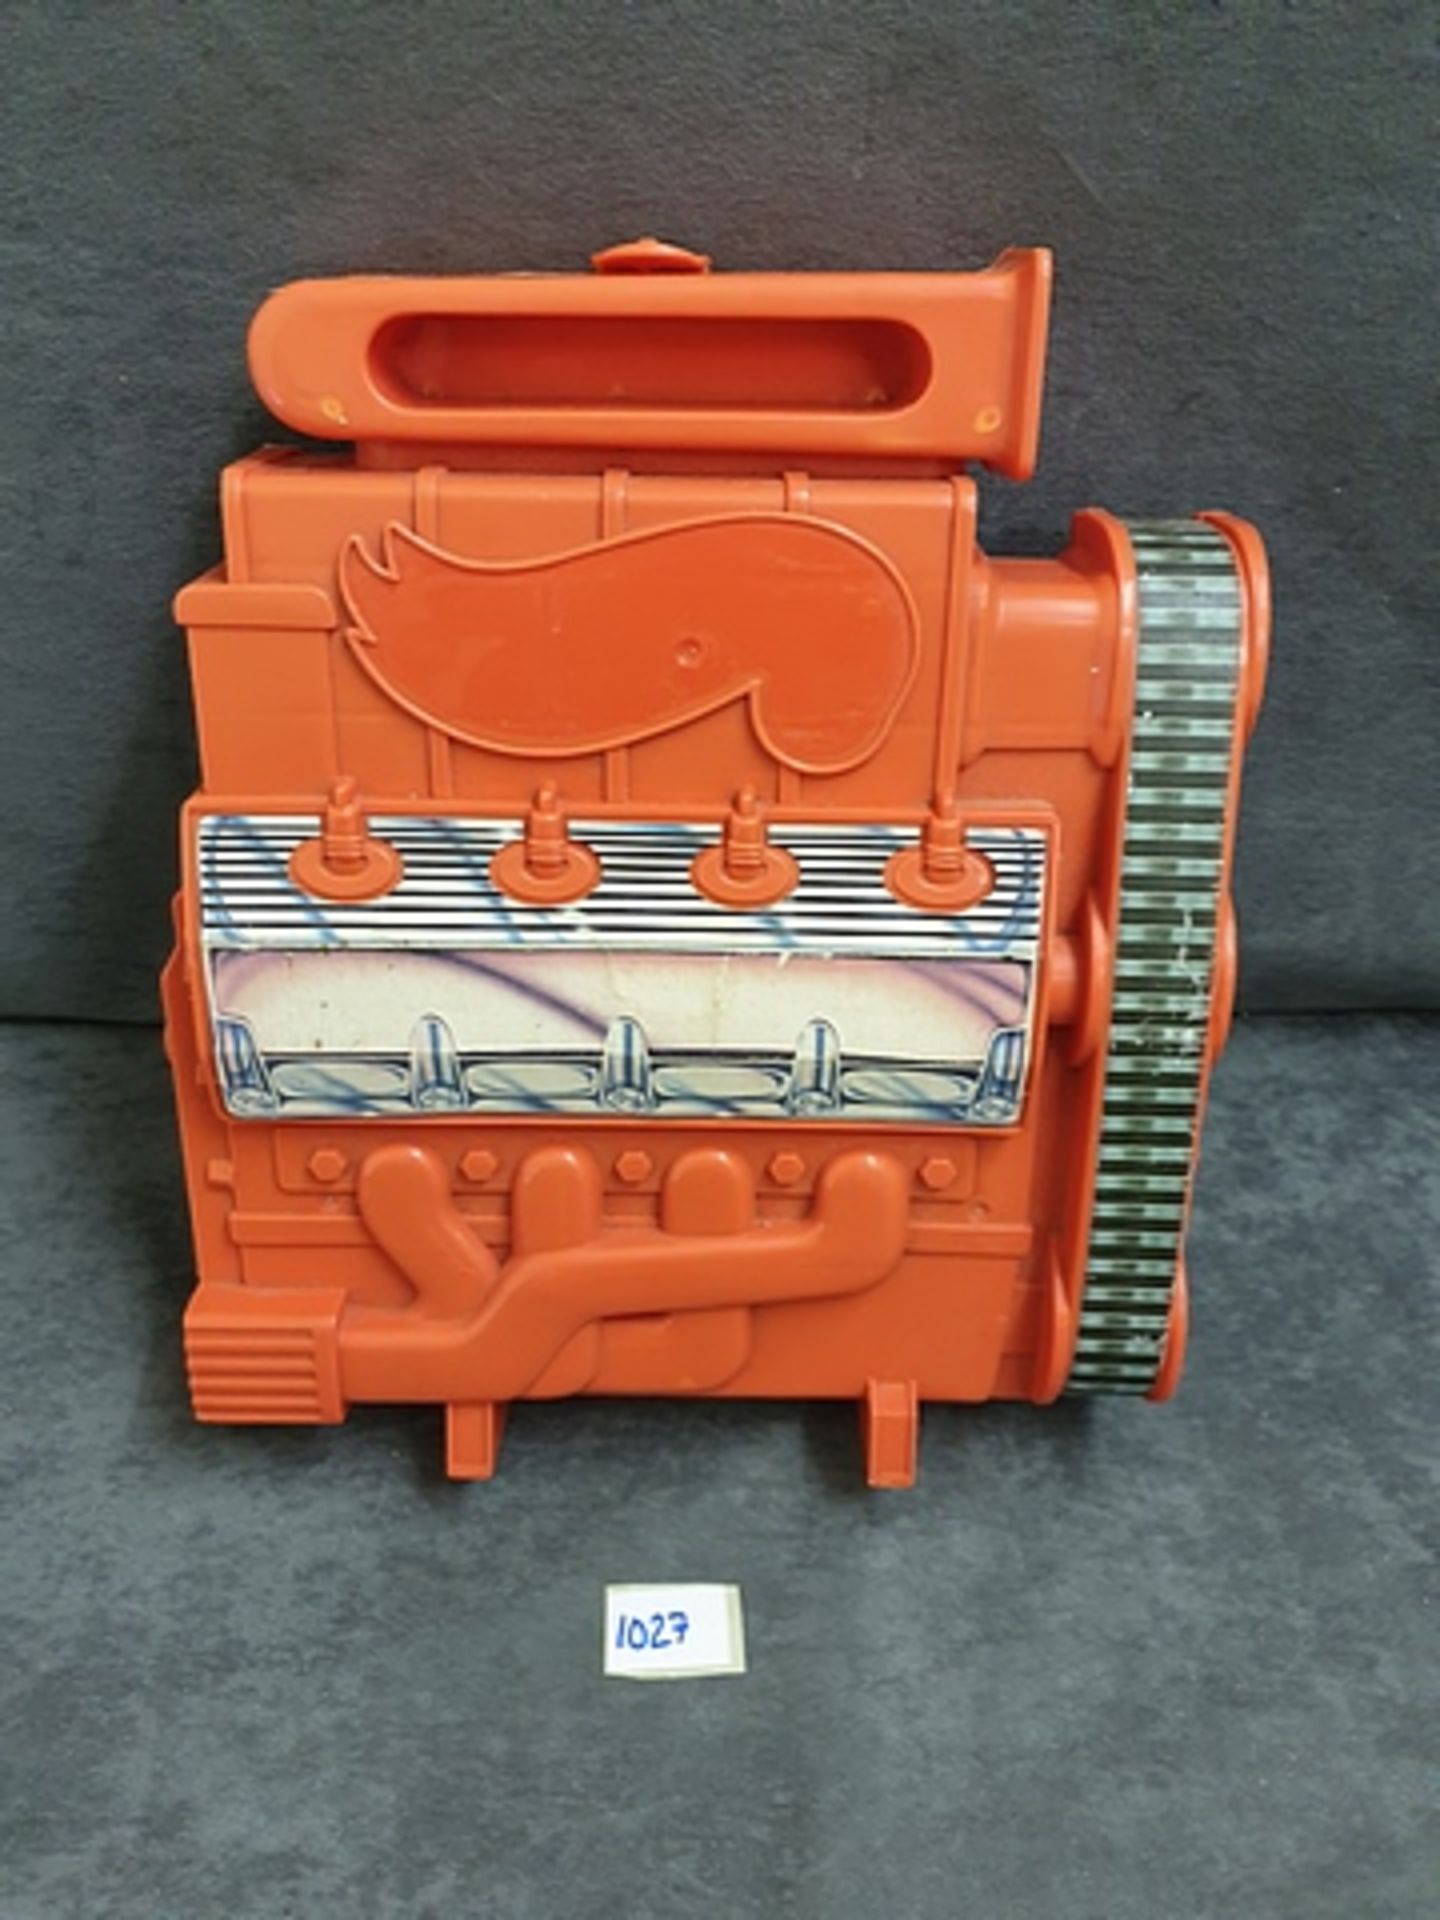 Vintage Hot Wheels Red Racers Engine Carrying Storage Case Car Holder 1983Complete With 18 Cars - Image 4 of 4